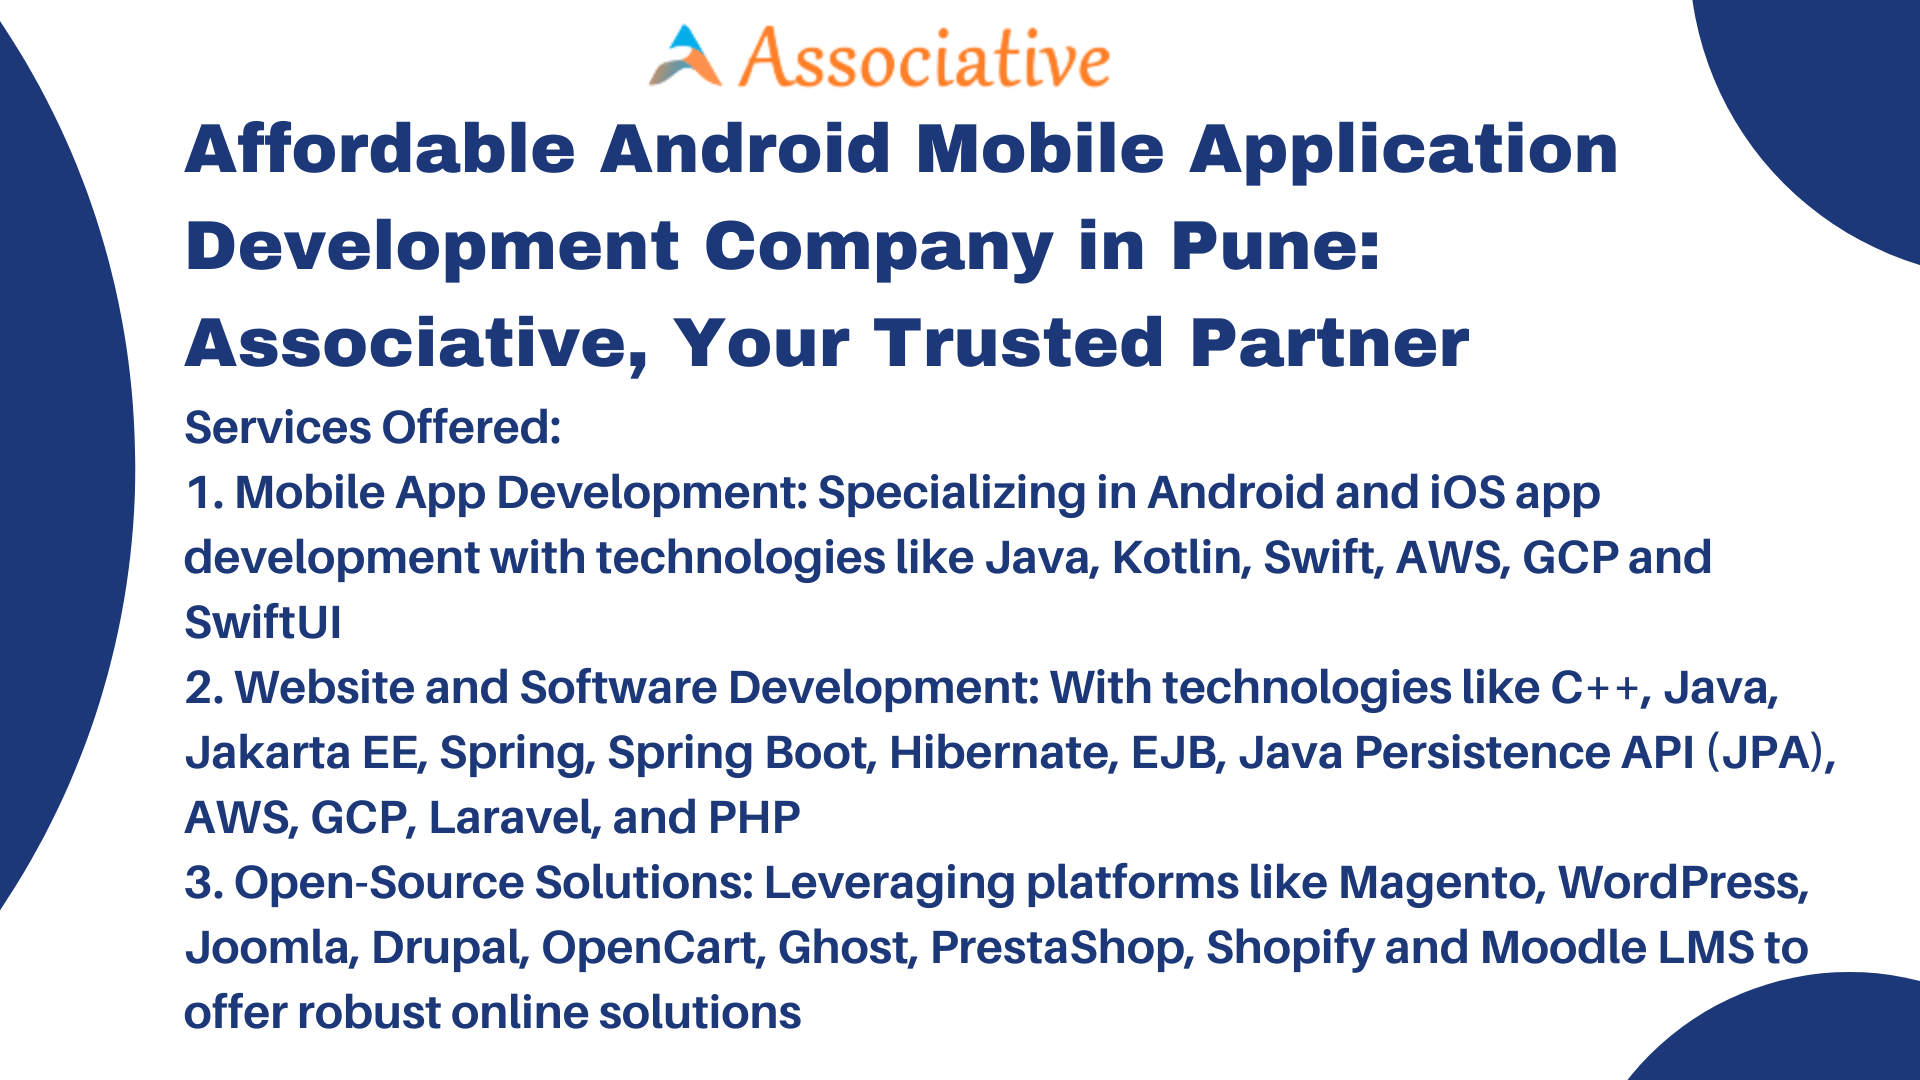 Affordable Android Mobile Application Development Company in Pune Associative Your Trusted Partner